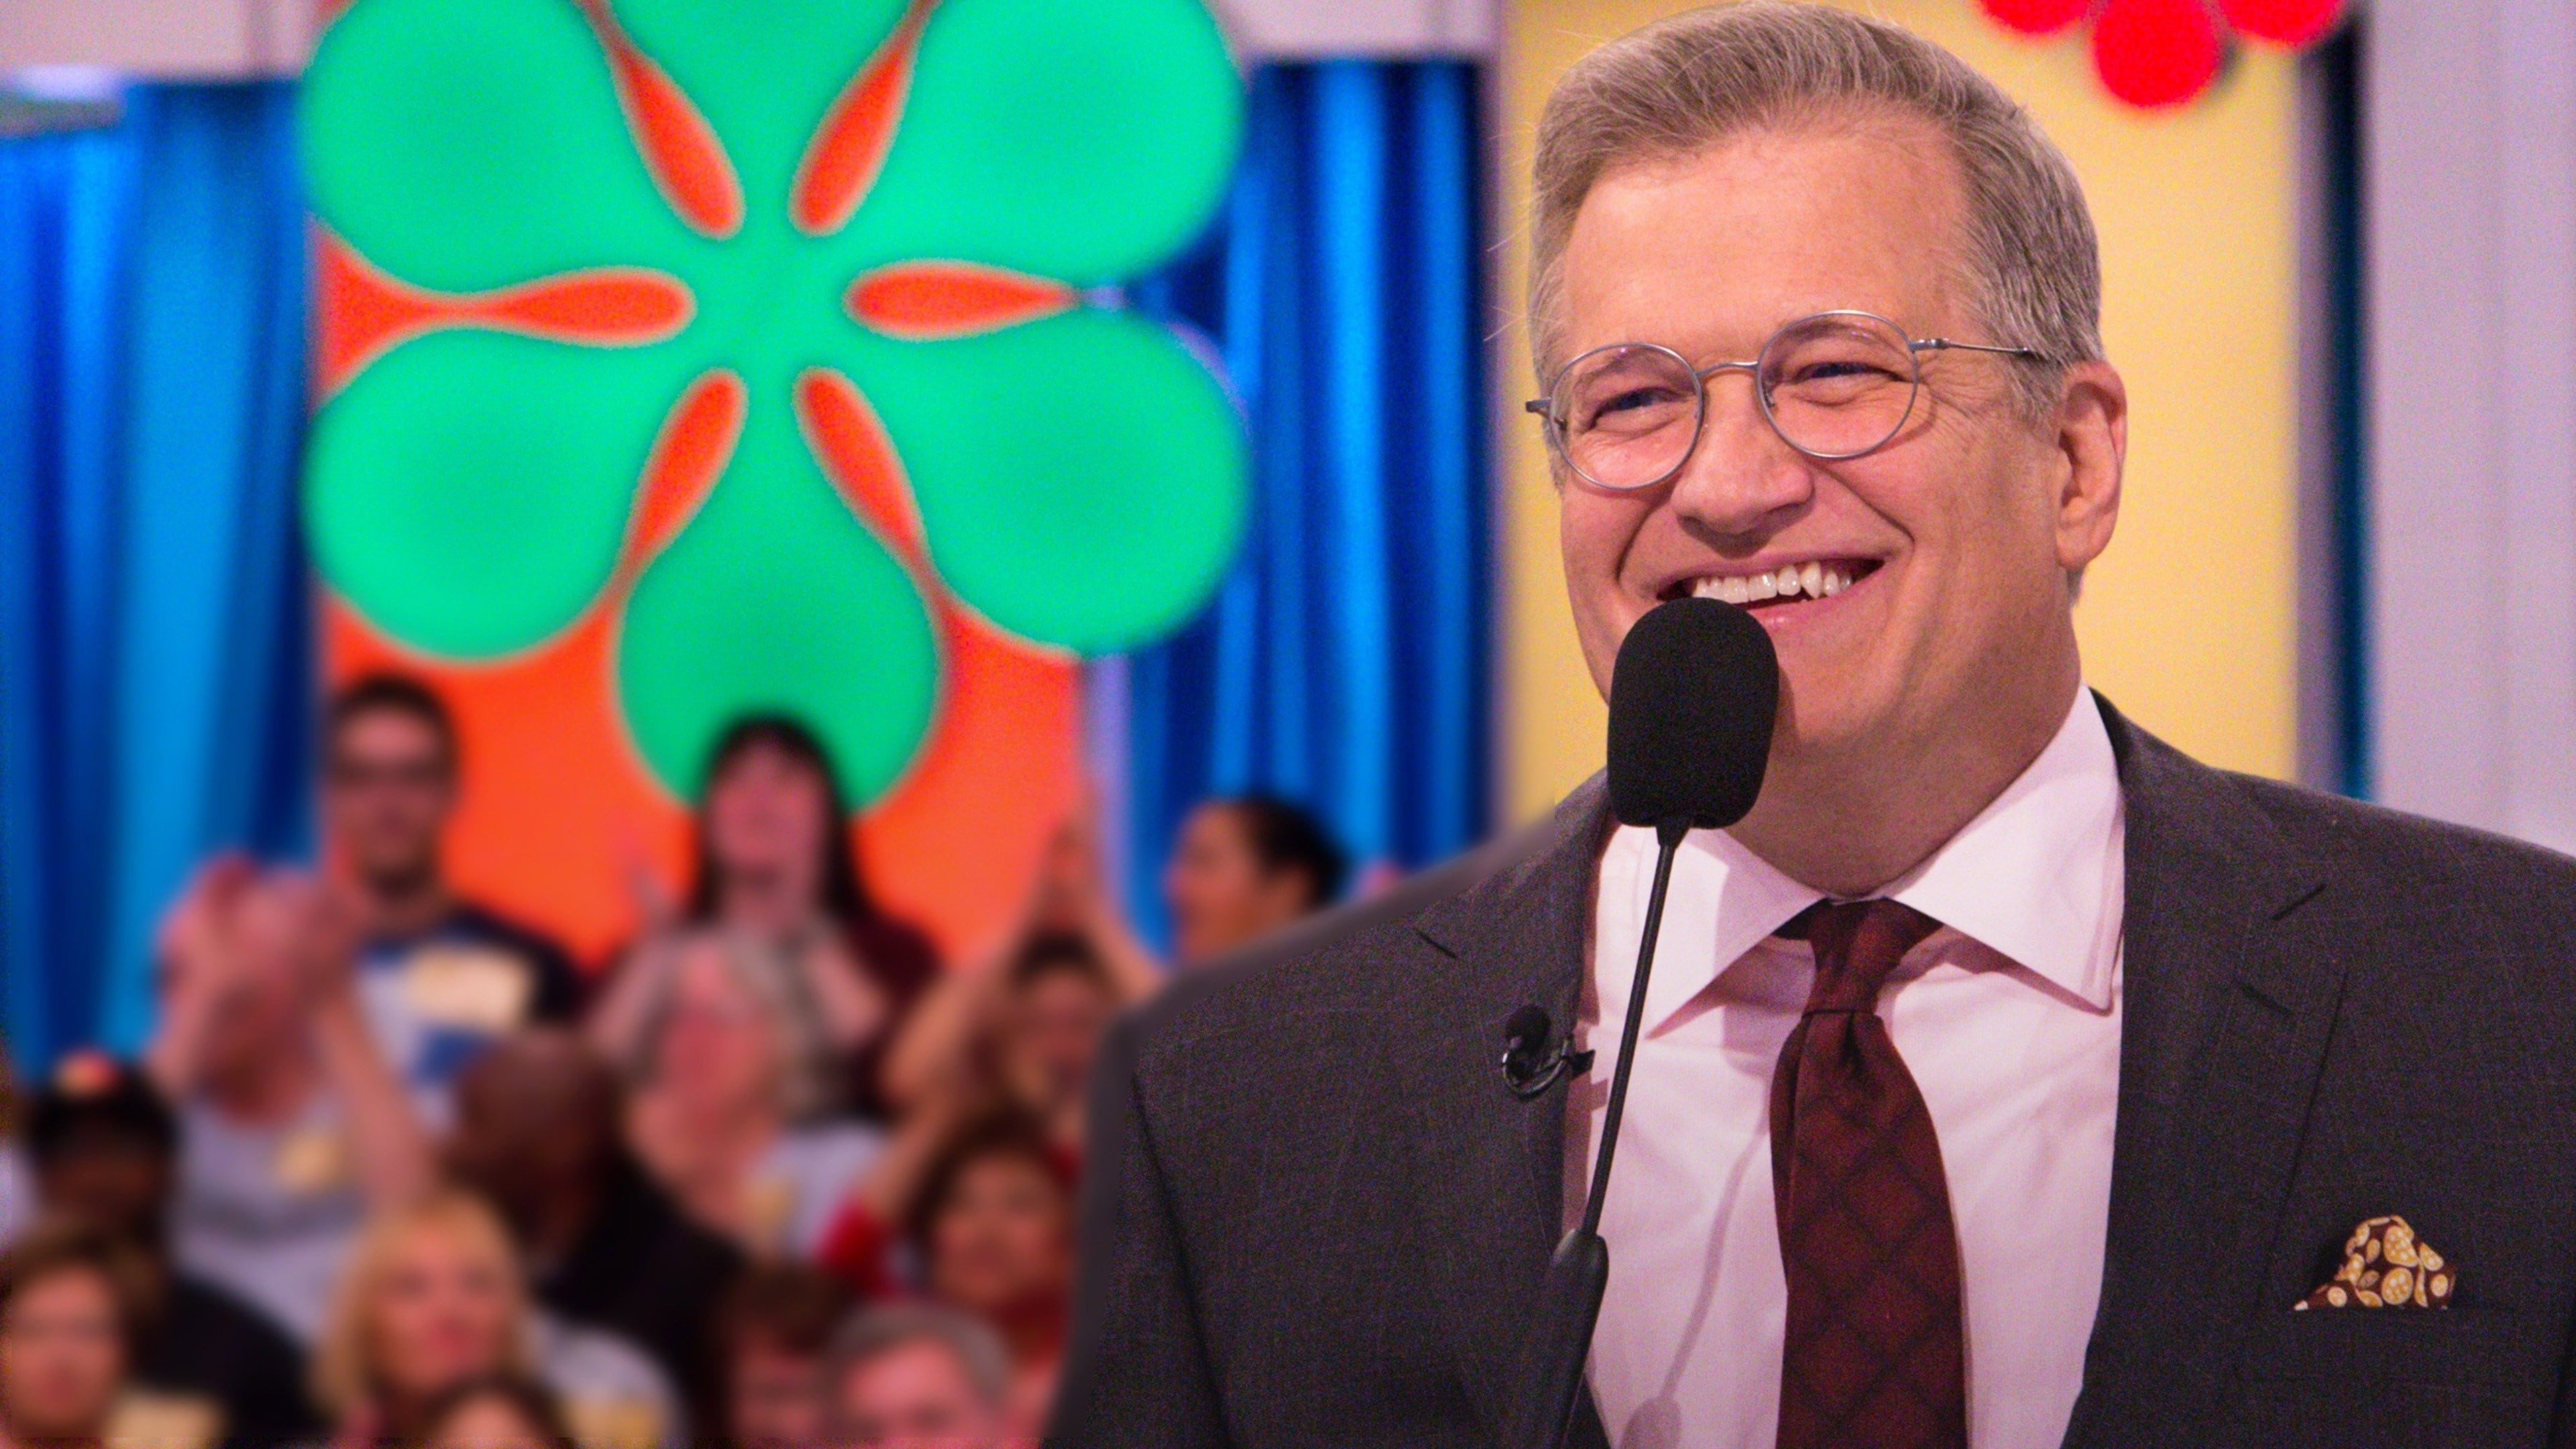 The Price Is Right - Season 1 Episode 214 : The Price Is Right Season 1 Episode 214